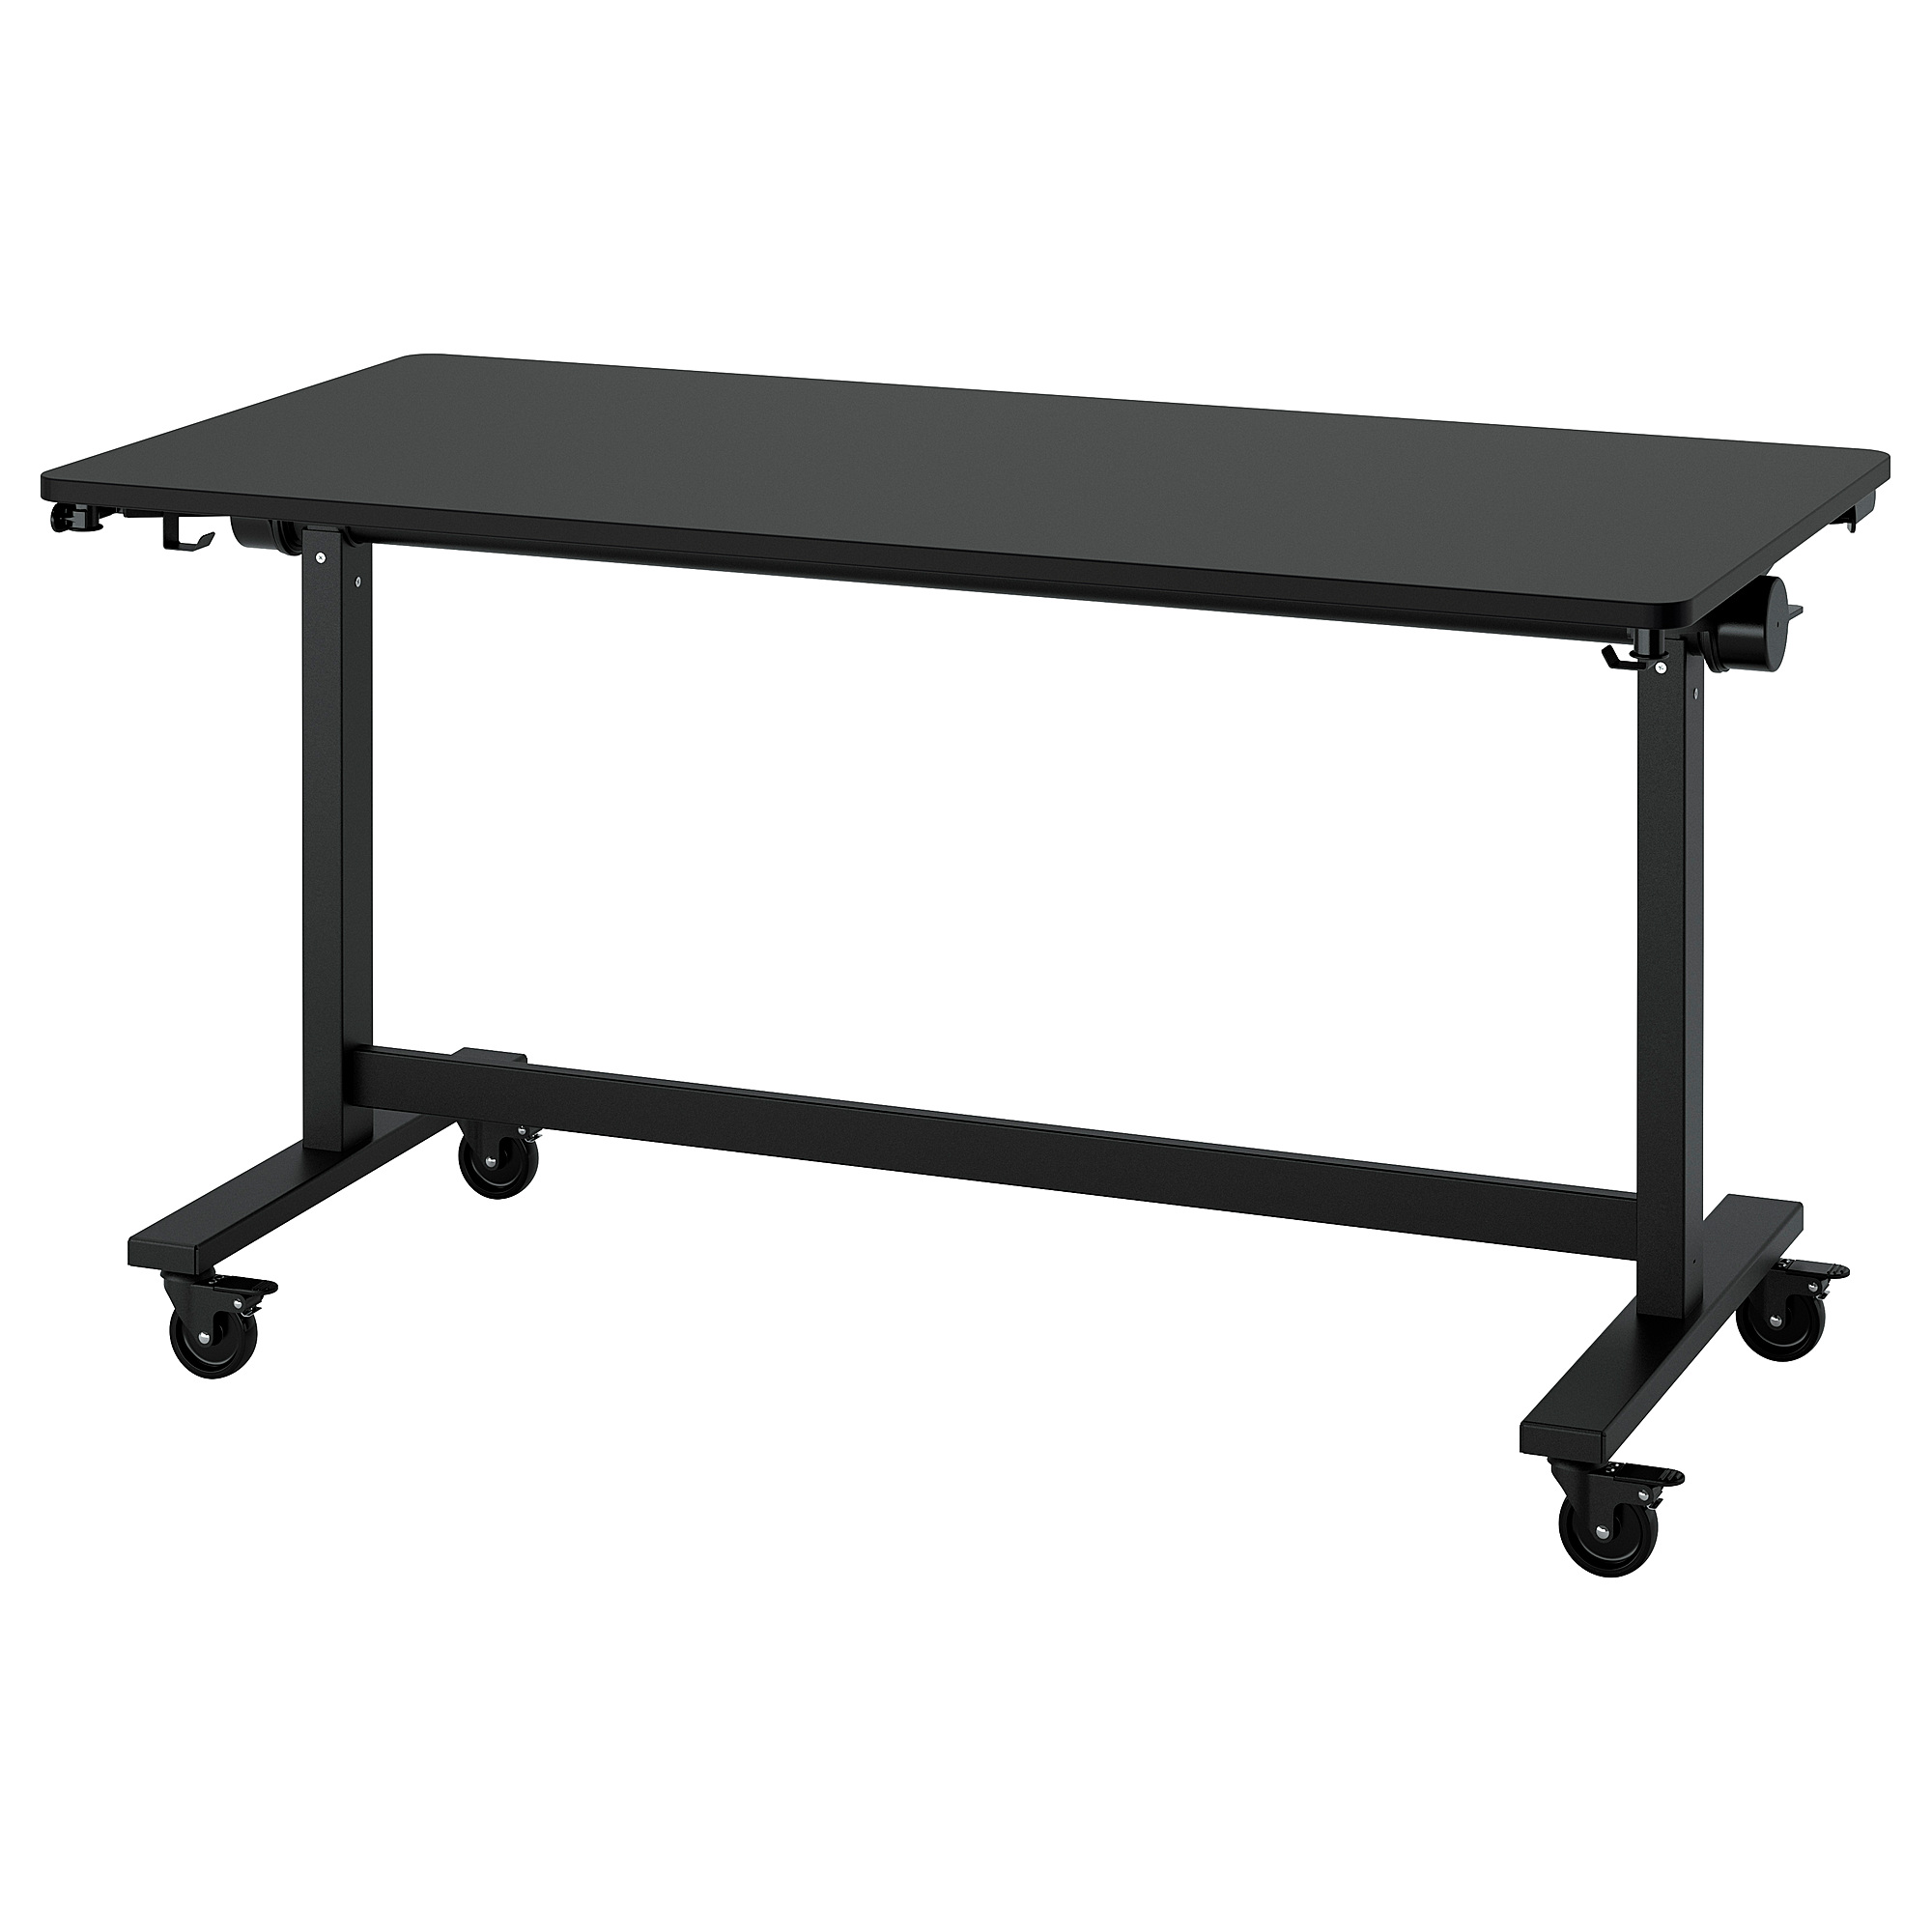 MITTZON foldable table with castors